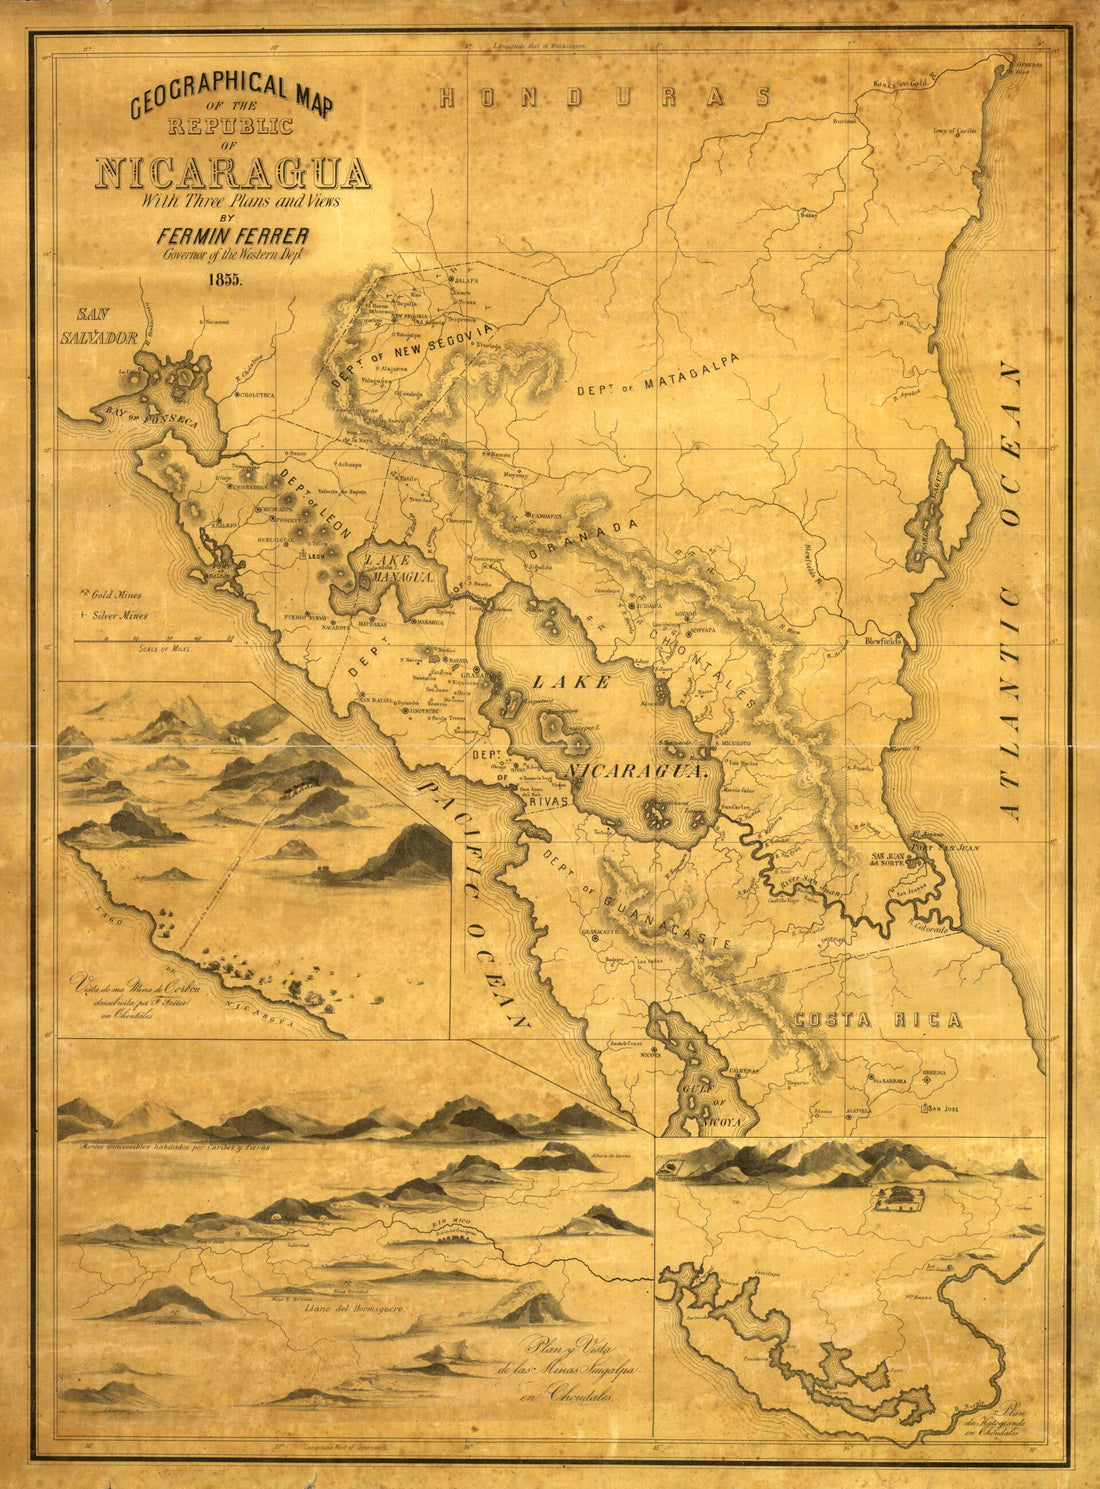 This old map of Geographical Map of the Republic of Nicaragua from 1855 was created by Fermin Ferrer in 1855